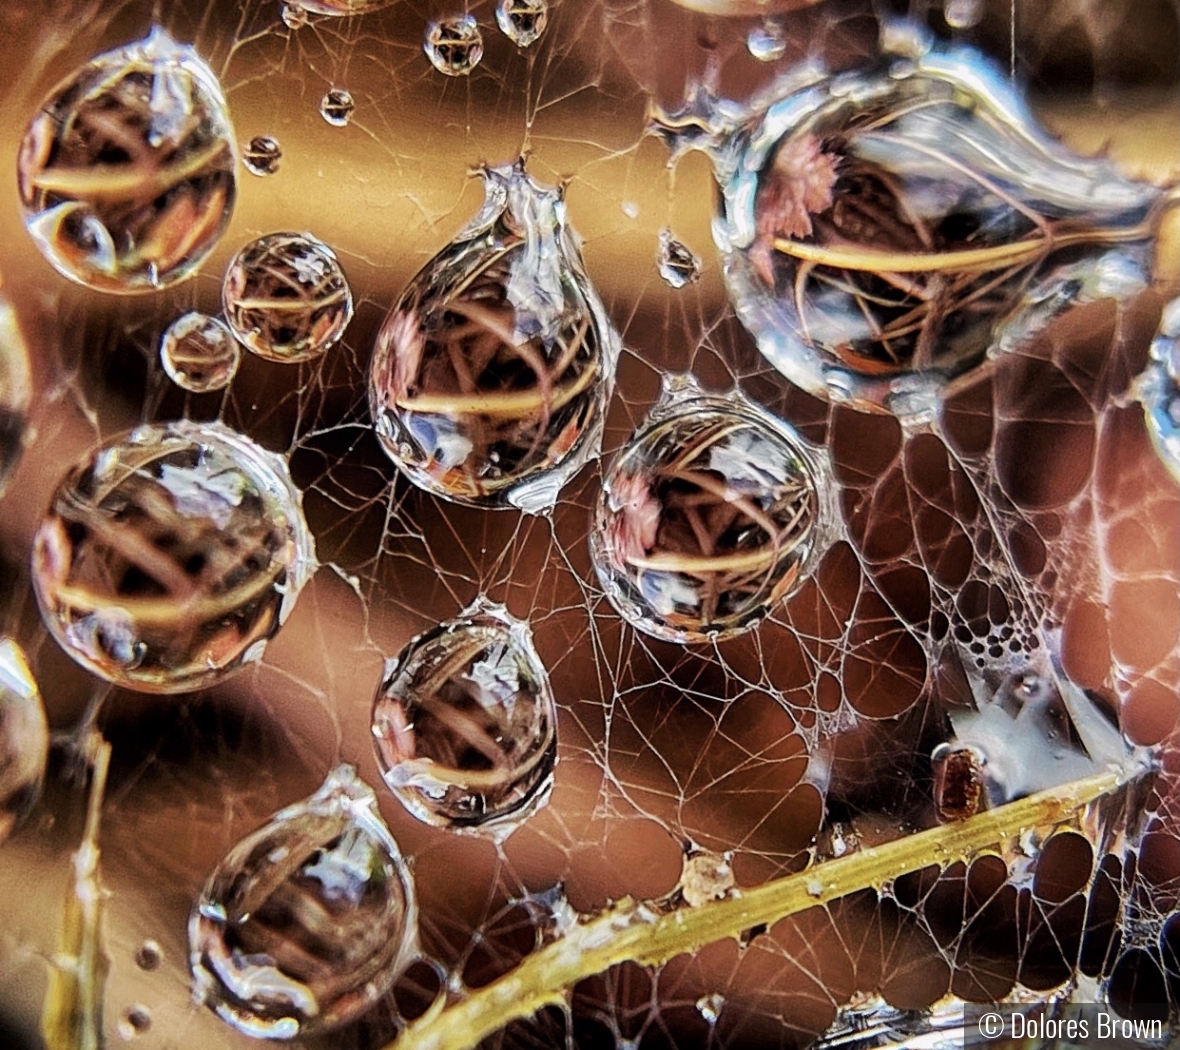 Raindrops on Spiderwebs by Dolores Brown